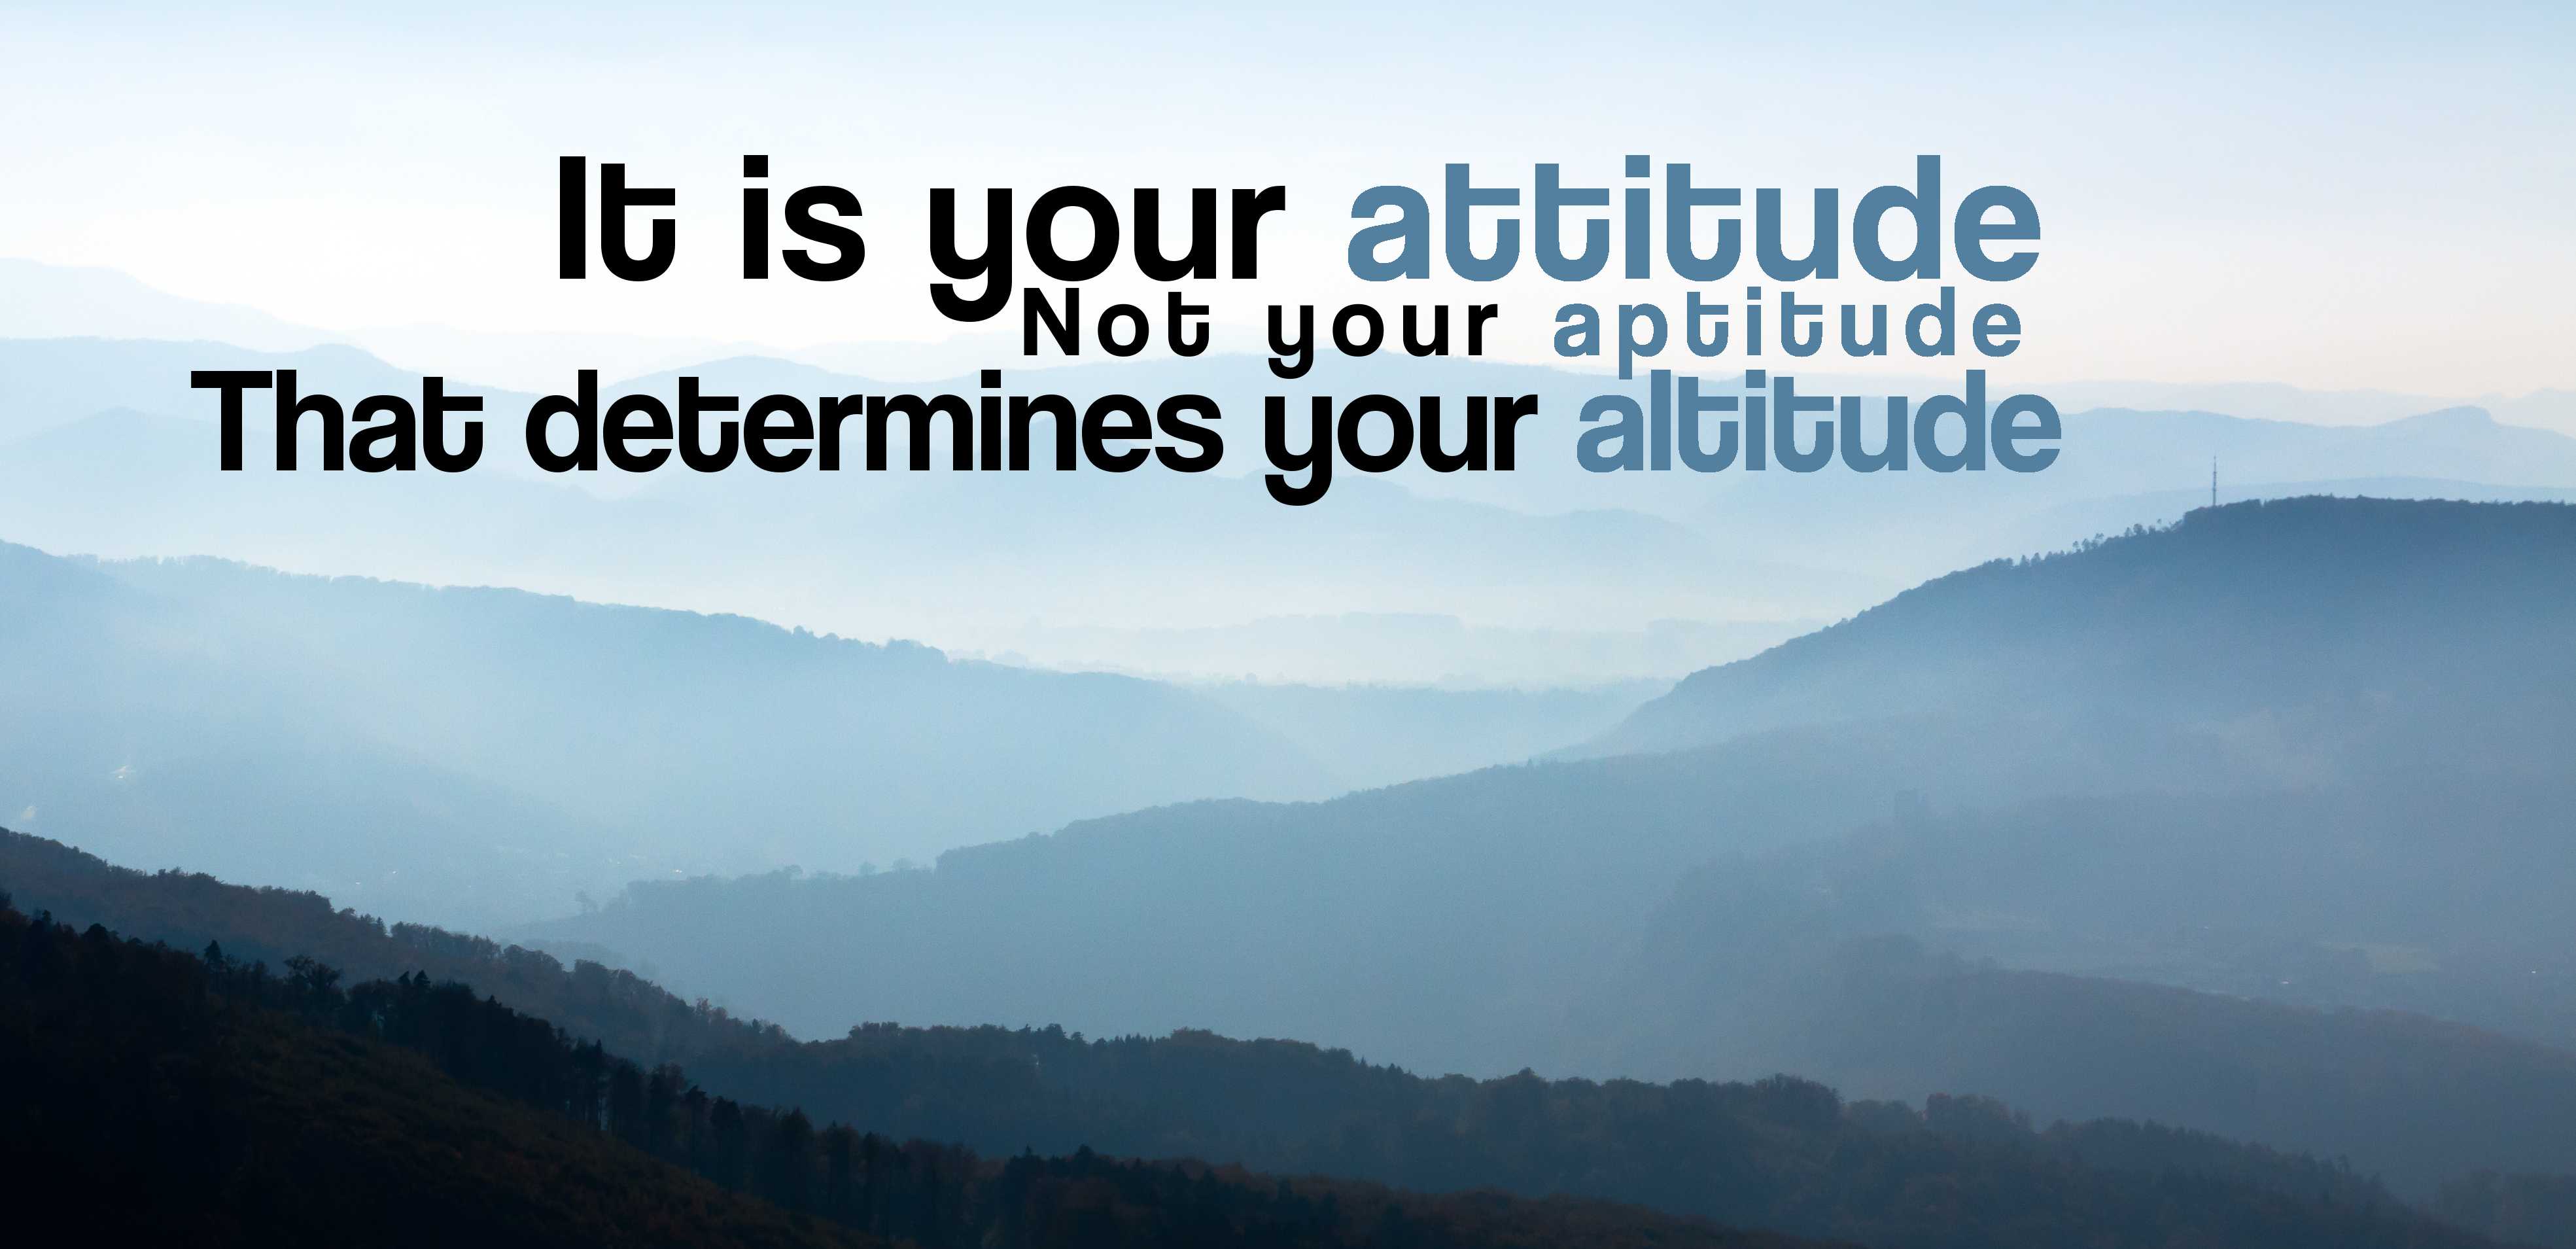 ATTITUDE CAN CHANGE YOUR ALTITUDE – The Isaiah 53:5 Project